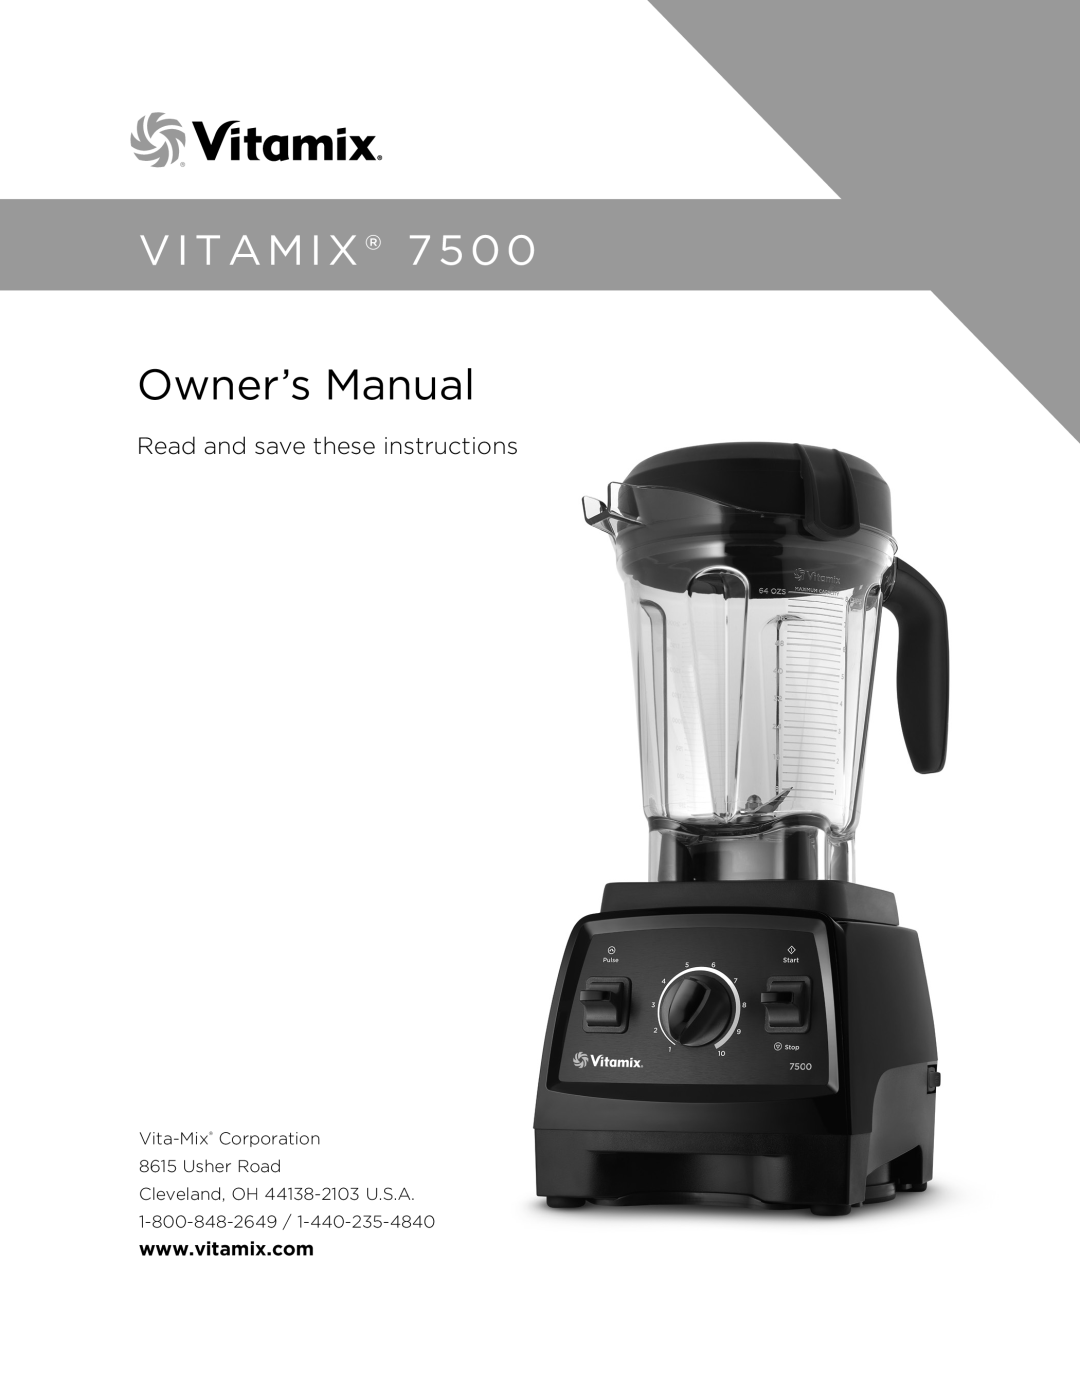 Vita-Mix 7500 owner manual Owner’s Manual, Vitamix, Read and save these instructions 